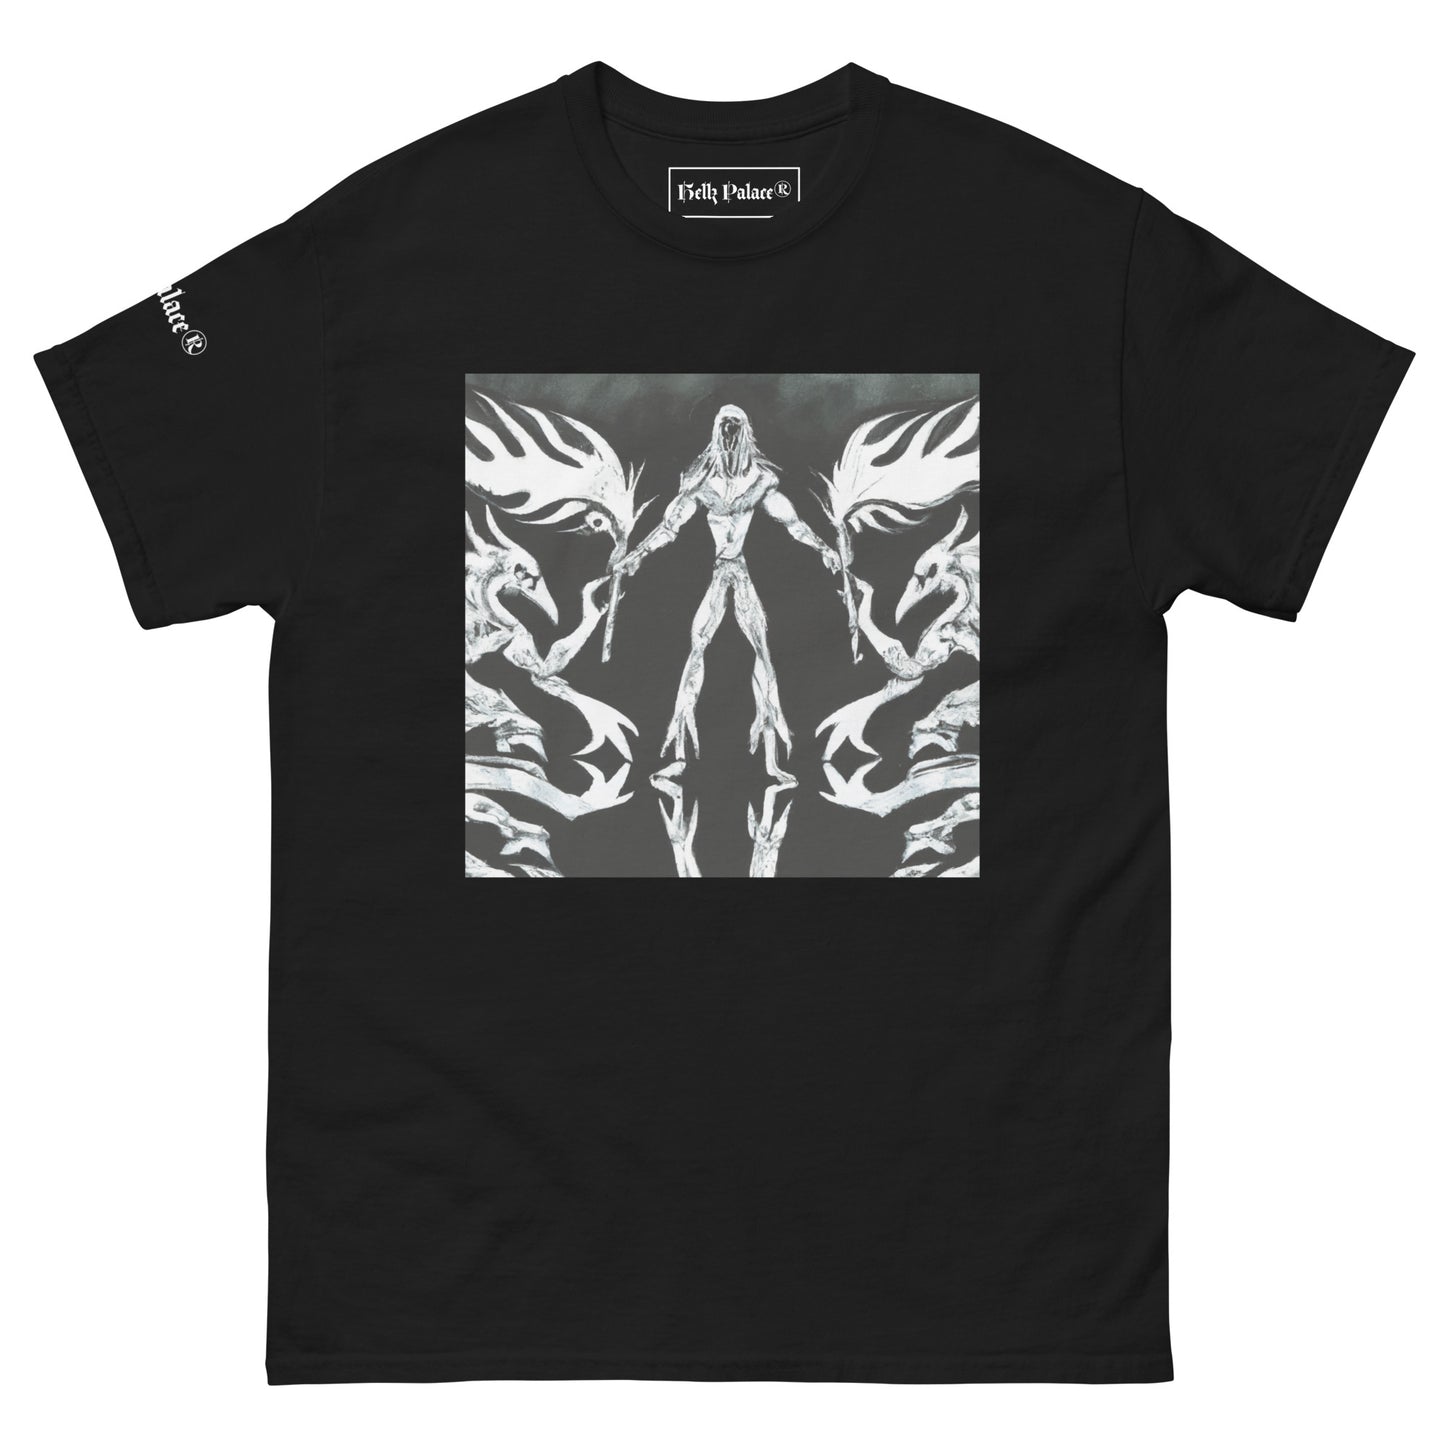 Hellz Palace® Brand Against Men's tee